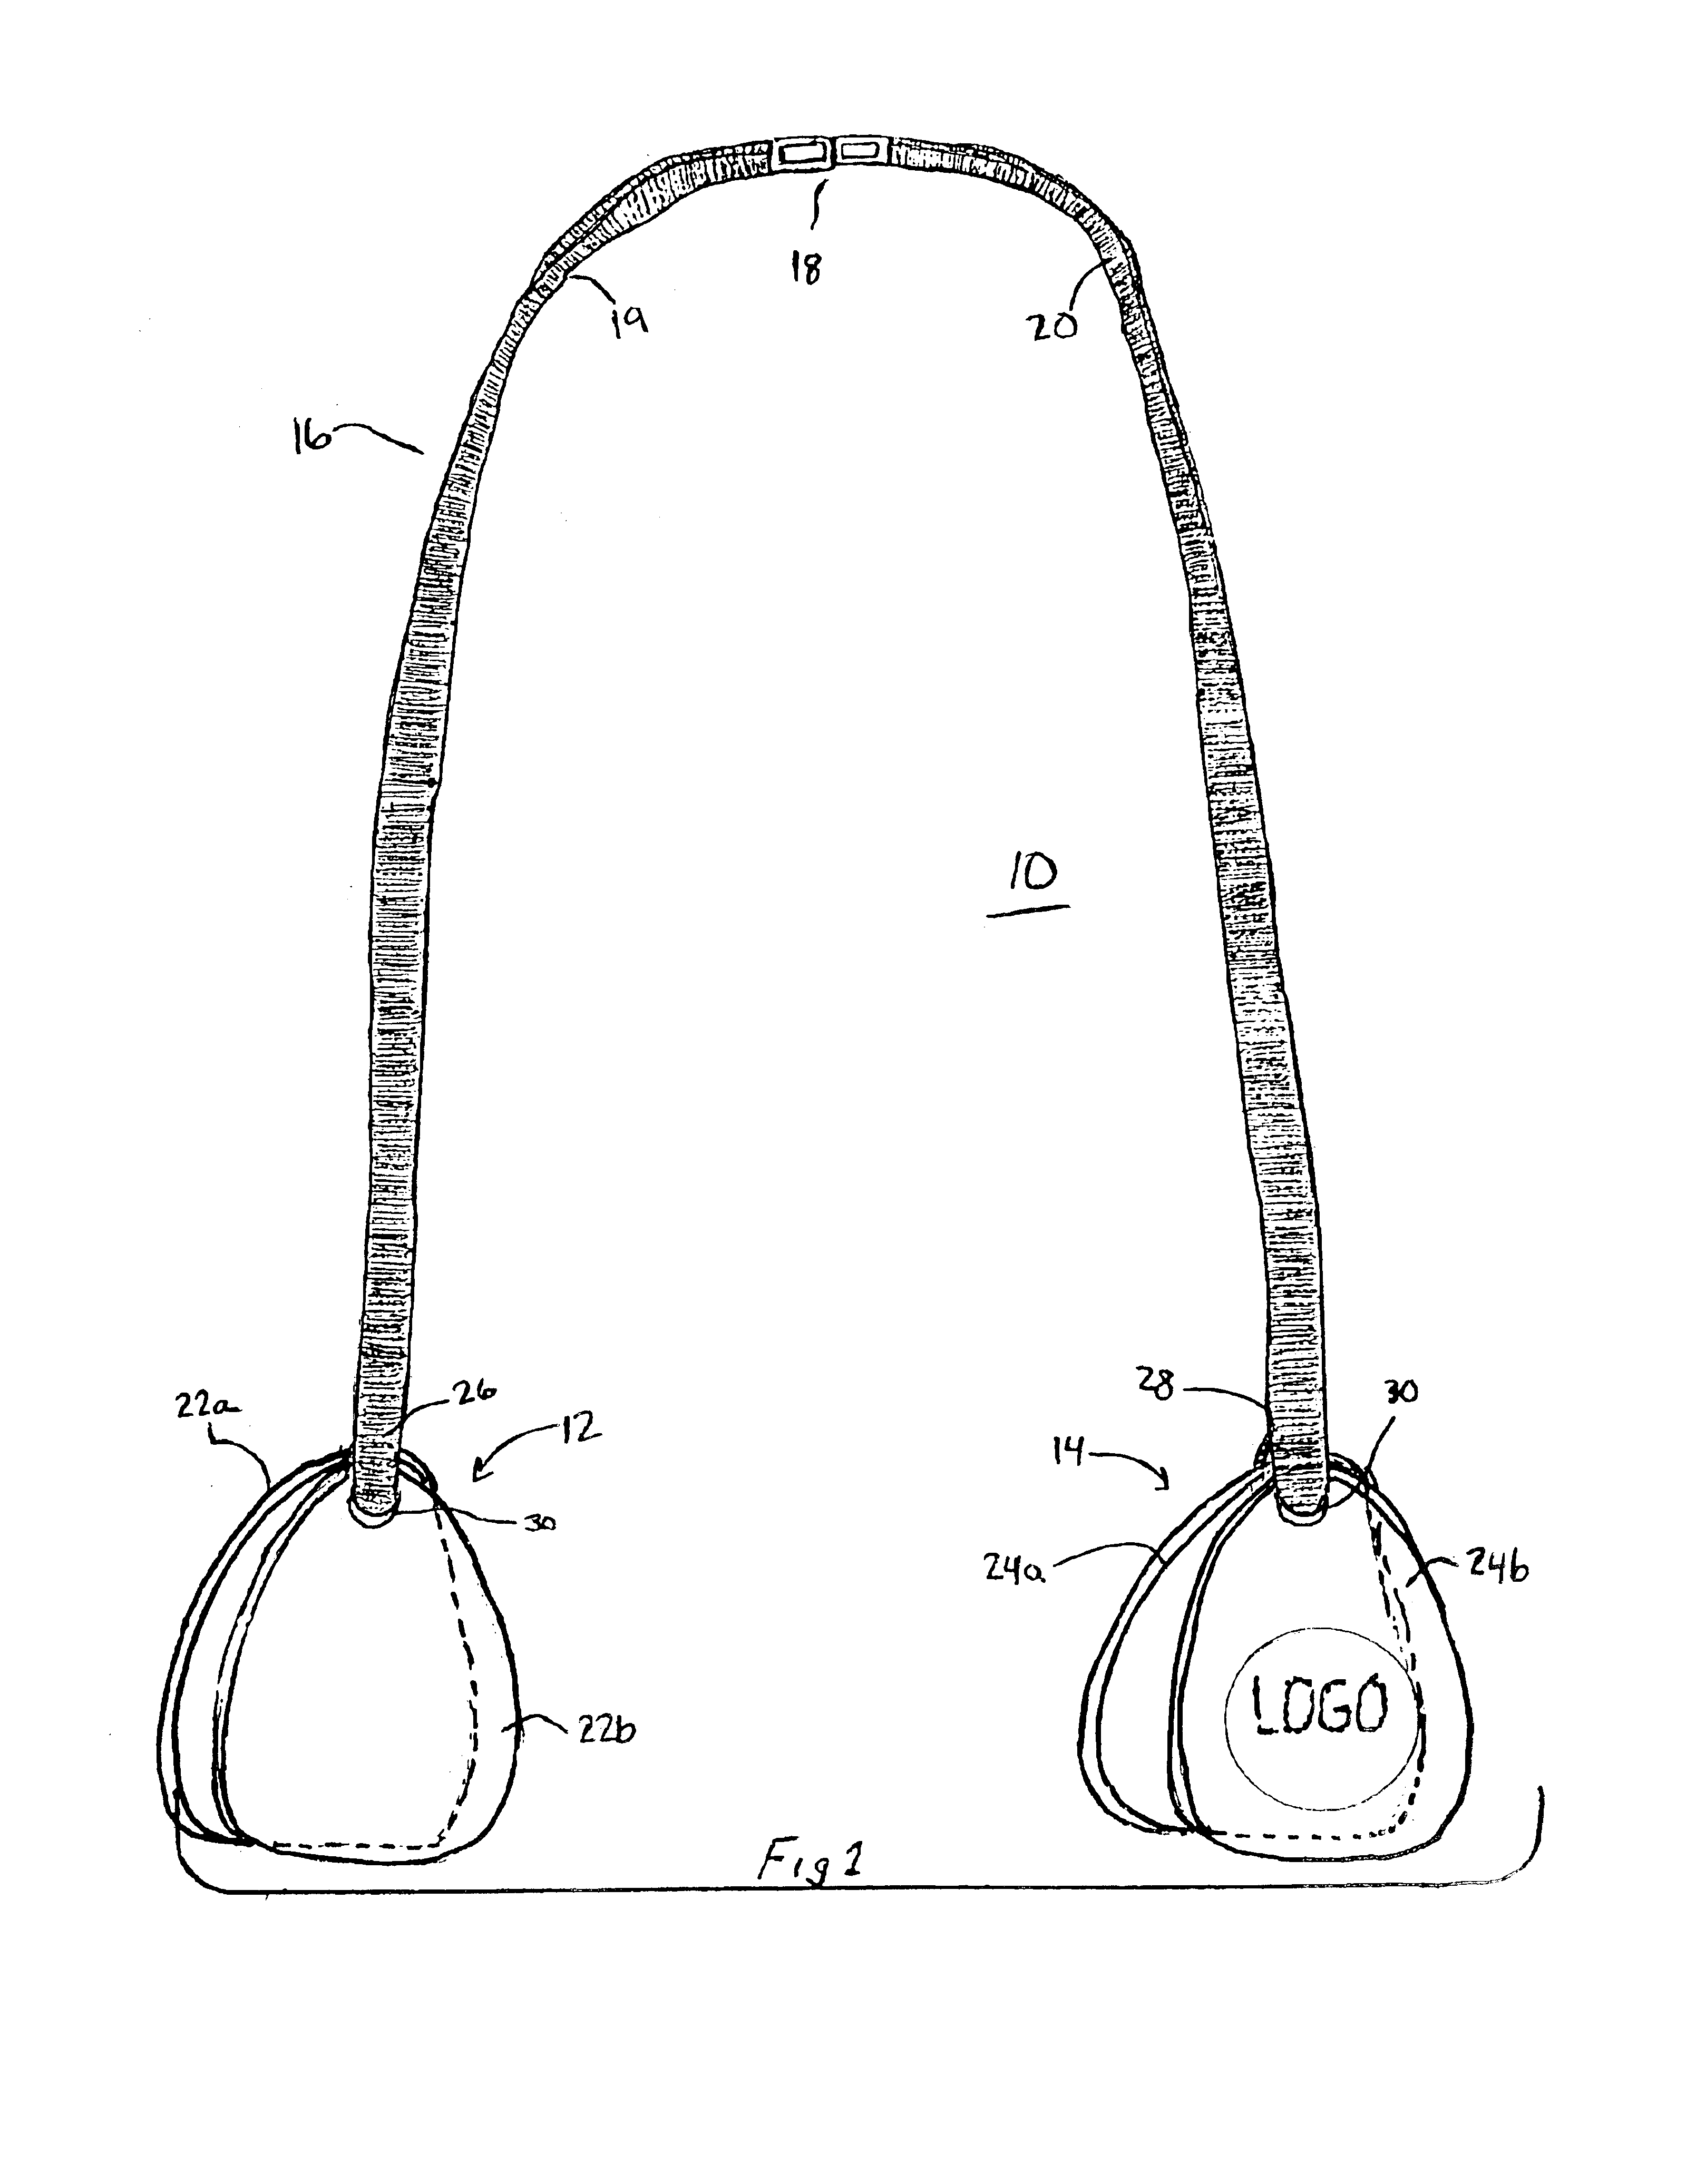 Device for detachably holding an absorbent napkin across the torso